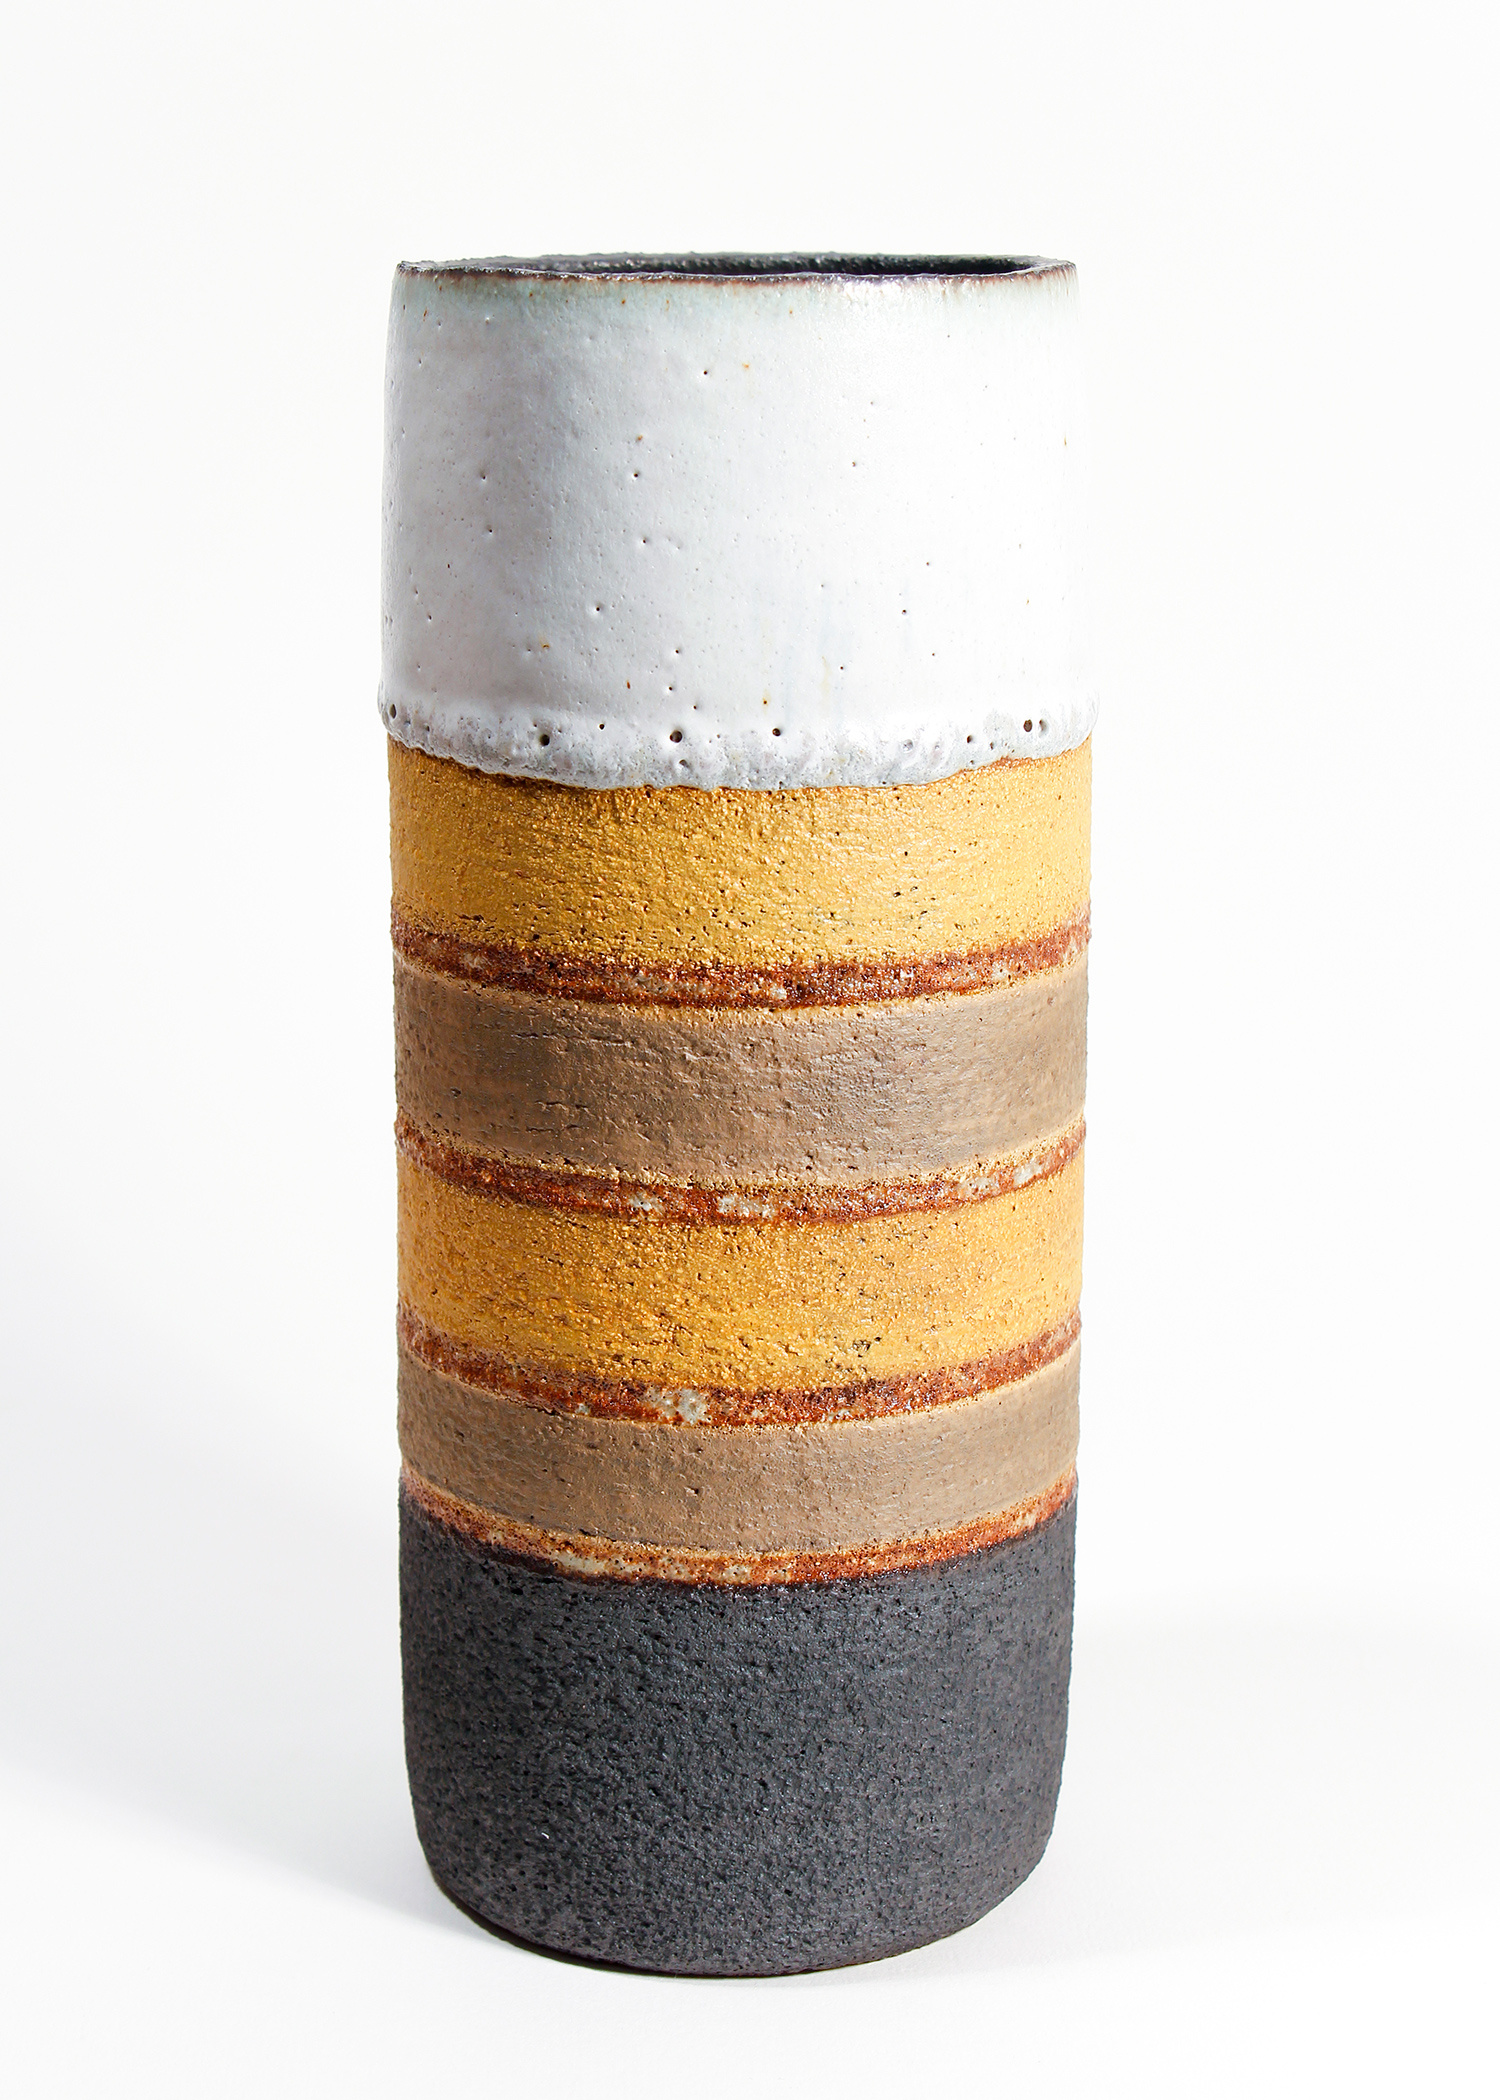 Tall Yellow/Grey/White Pot by Rosalie Dodds